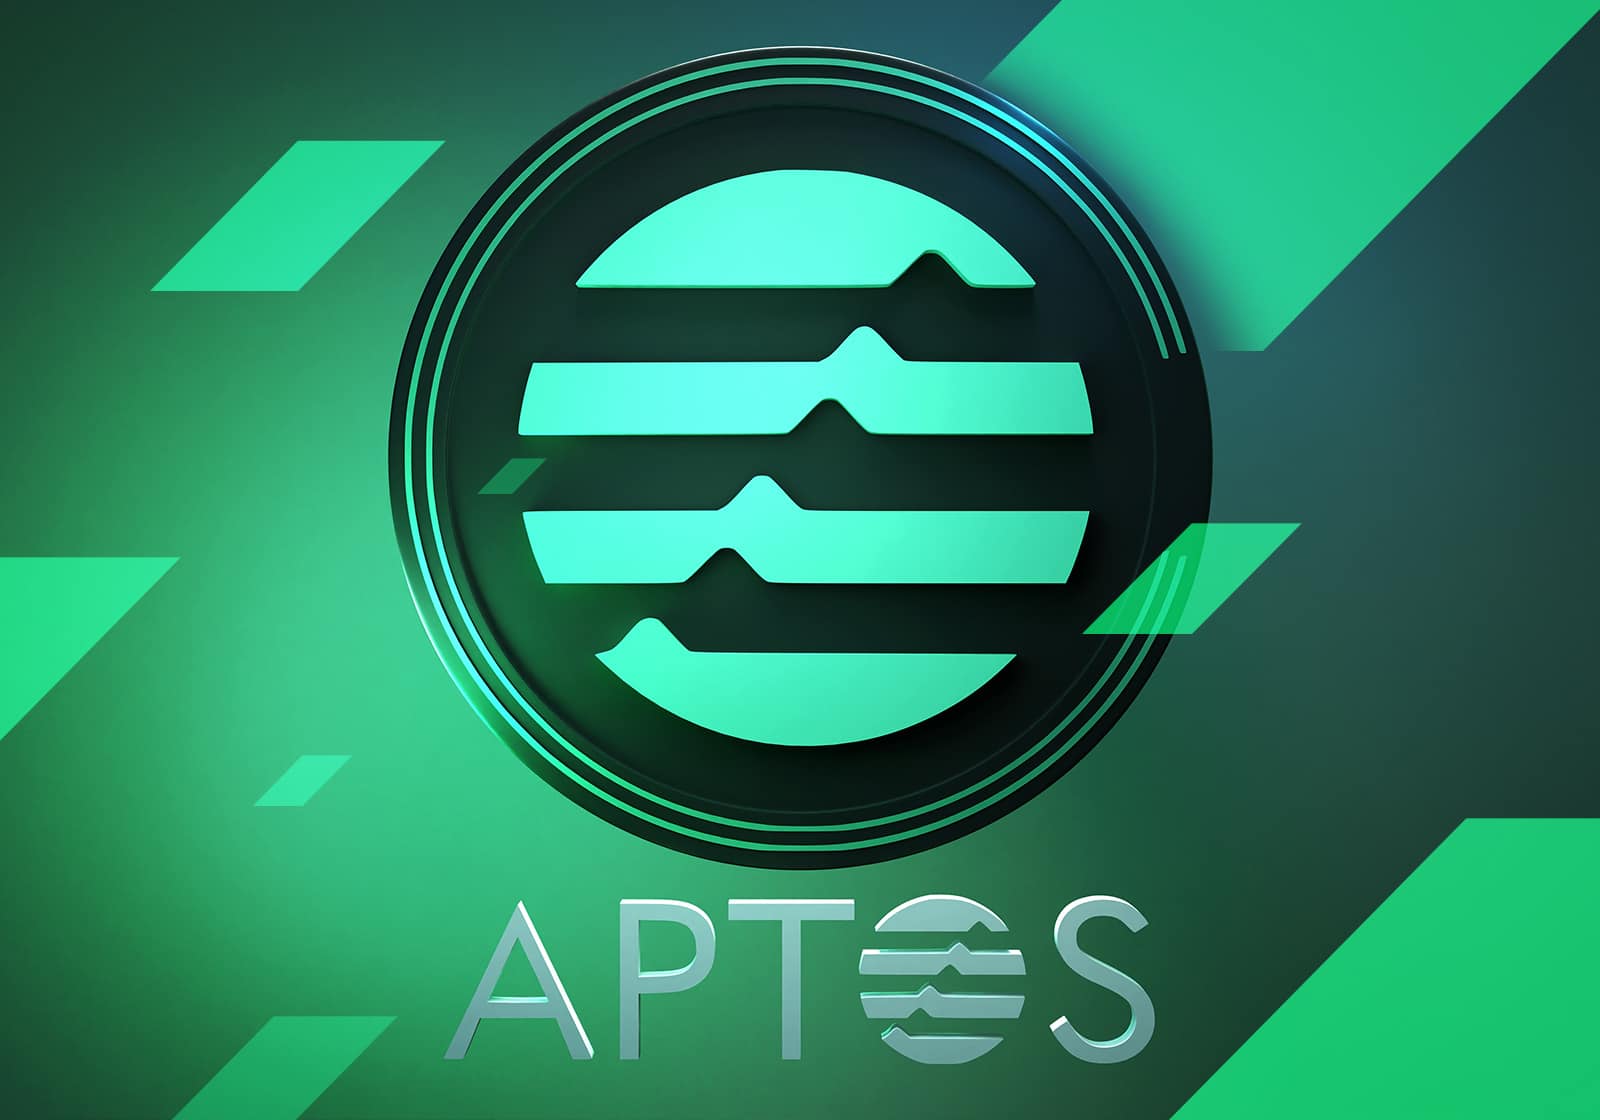 Mining and Trading Guide for Aptos